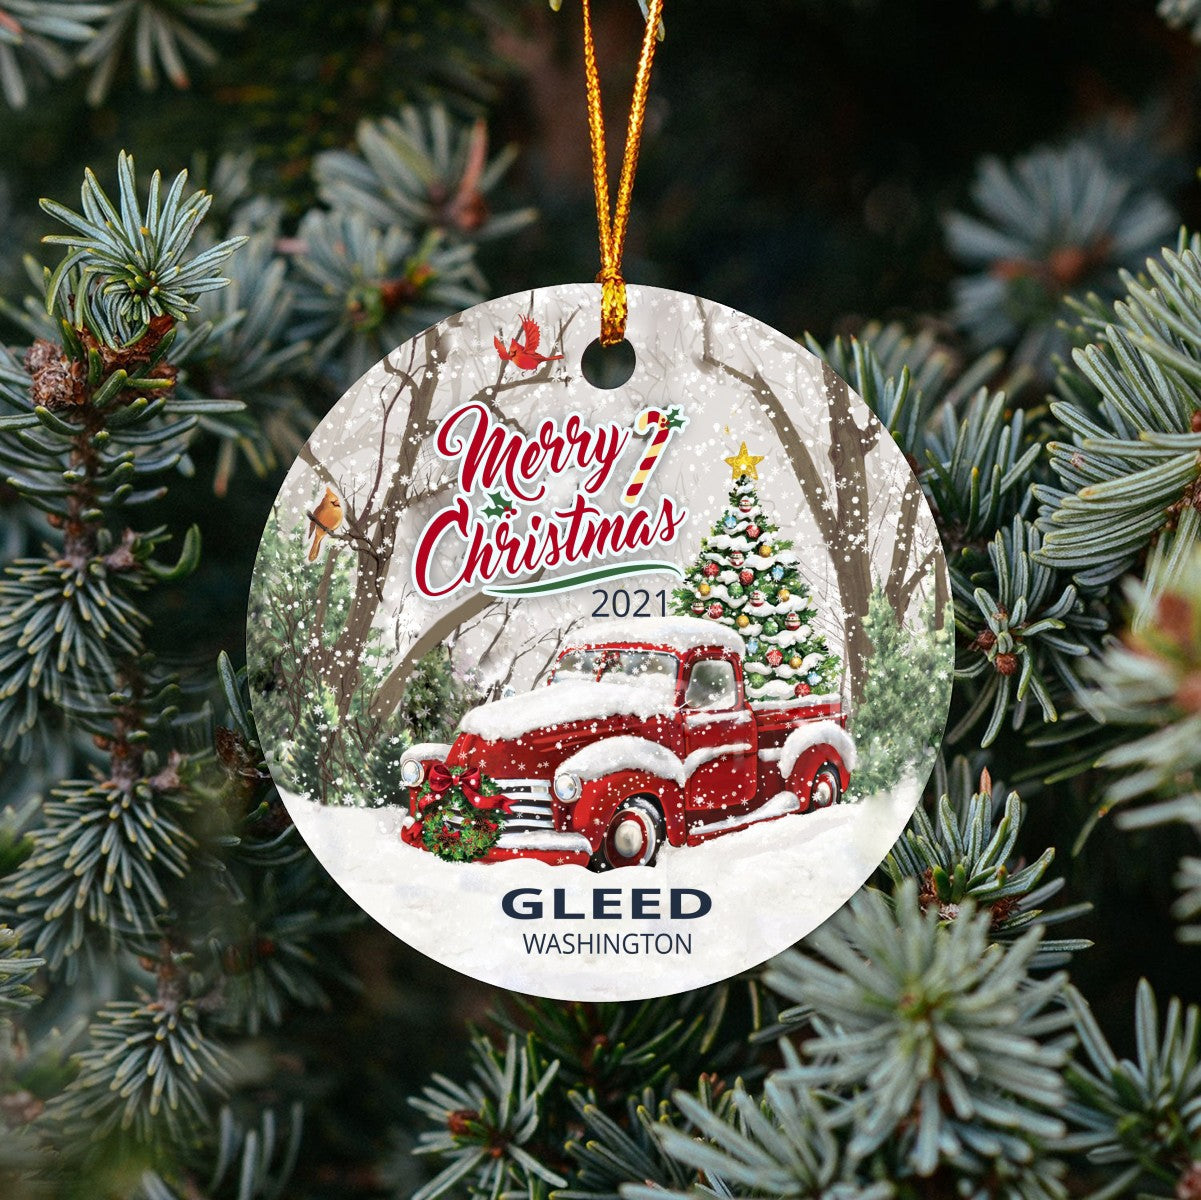 Christmas Tree Ornaments Gleed - Ornament With Name City, State Gleed Washington WA Ornament - Red Truck Xmas Ornaments 3'' Plastic Gift For Family, Friend And Housewarming